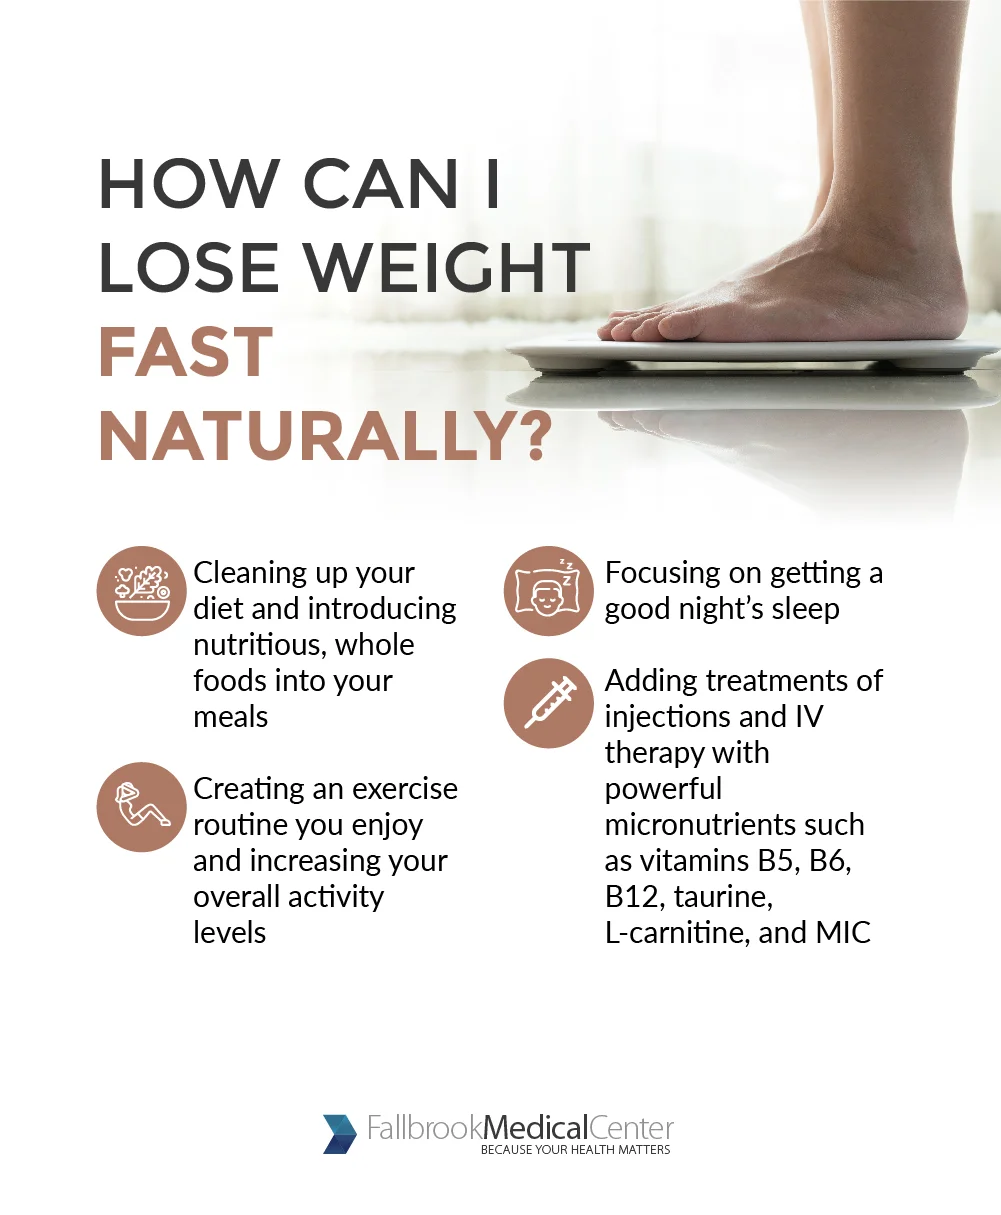 How Can I Lose Weight Fast Naturally? - Fallbrook Medical Center